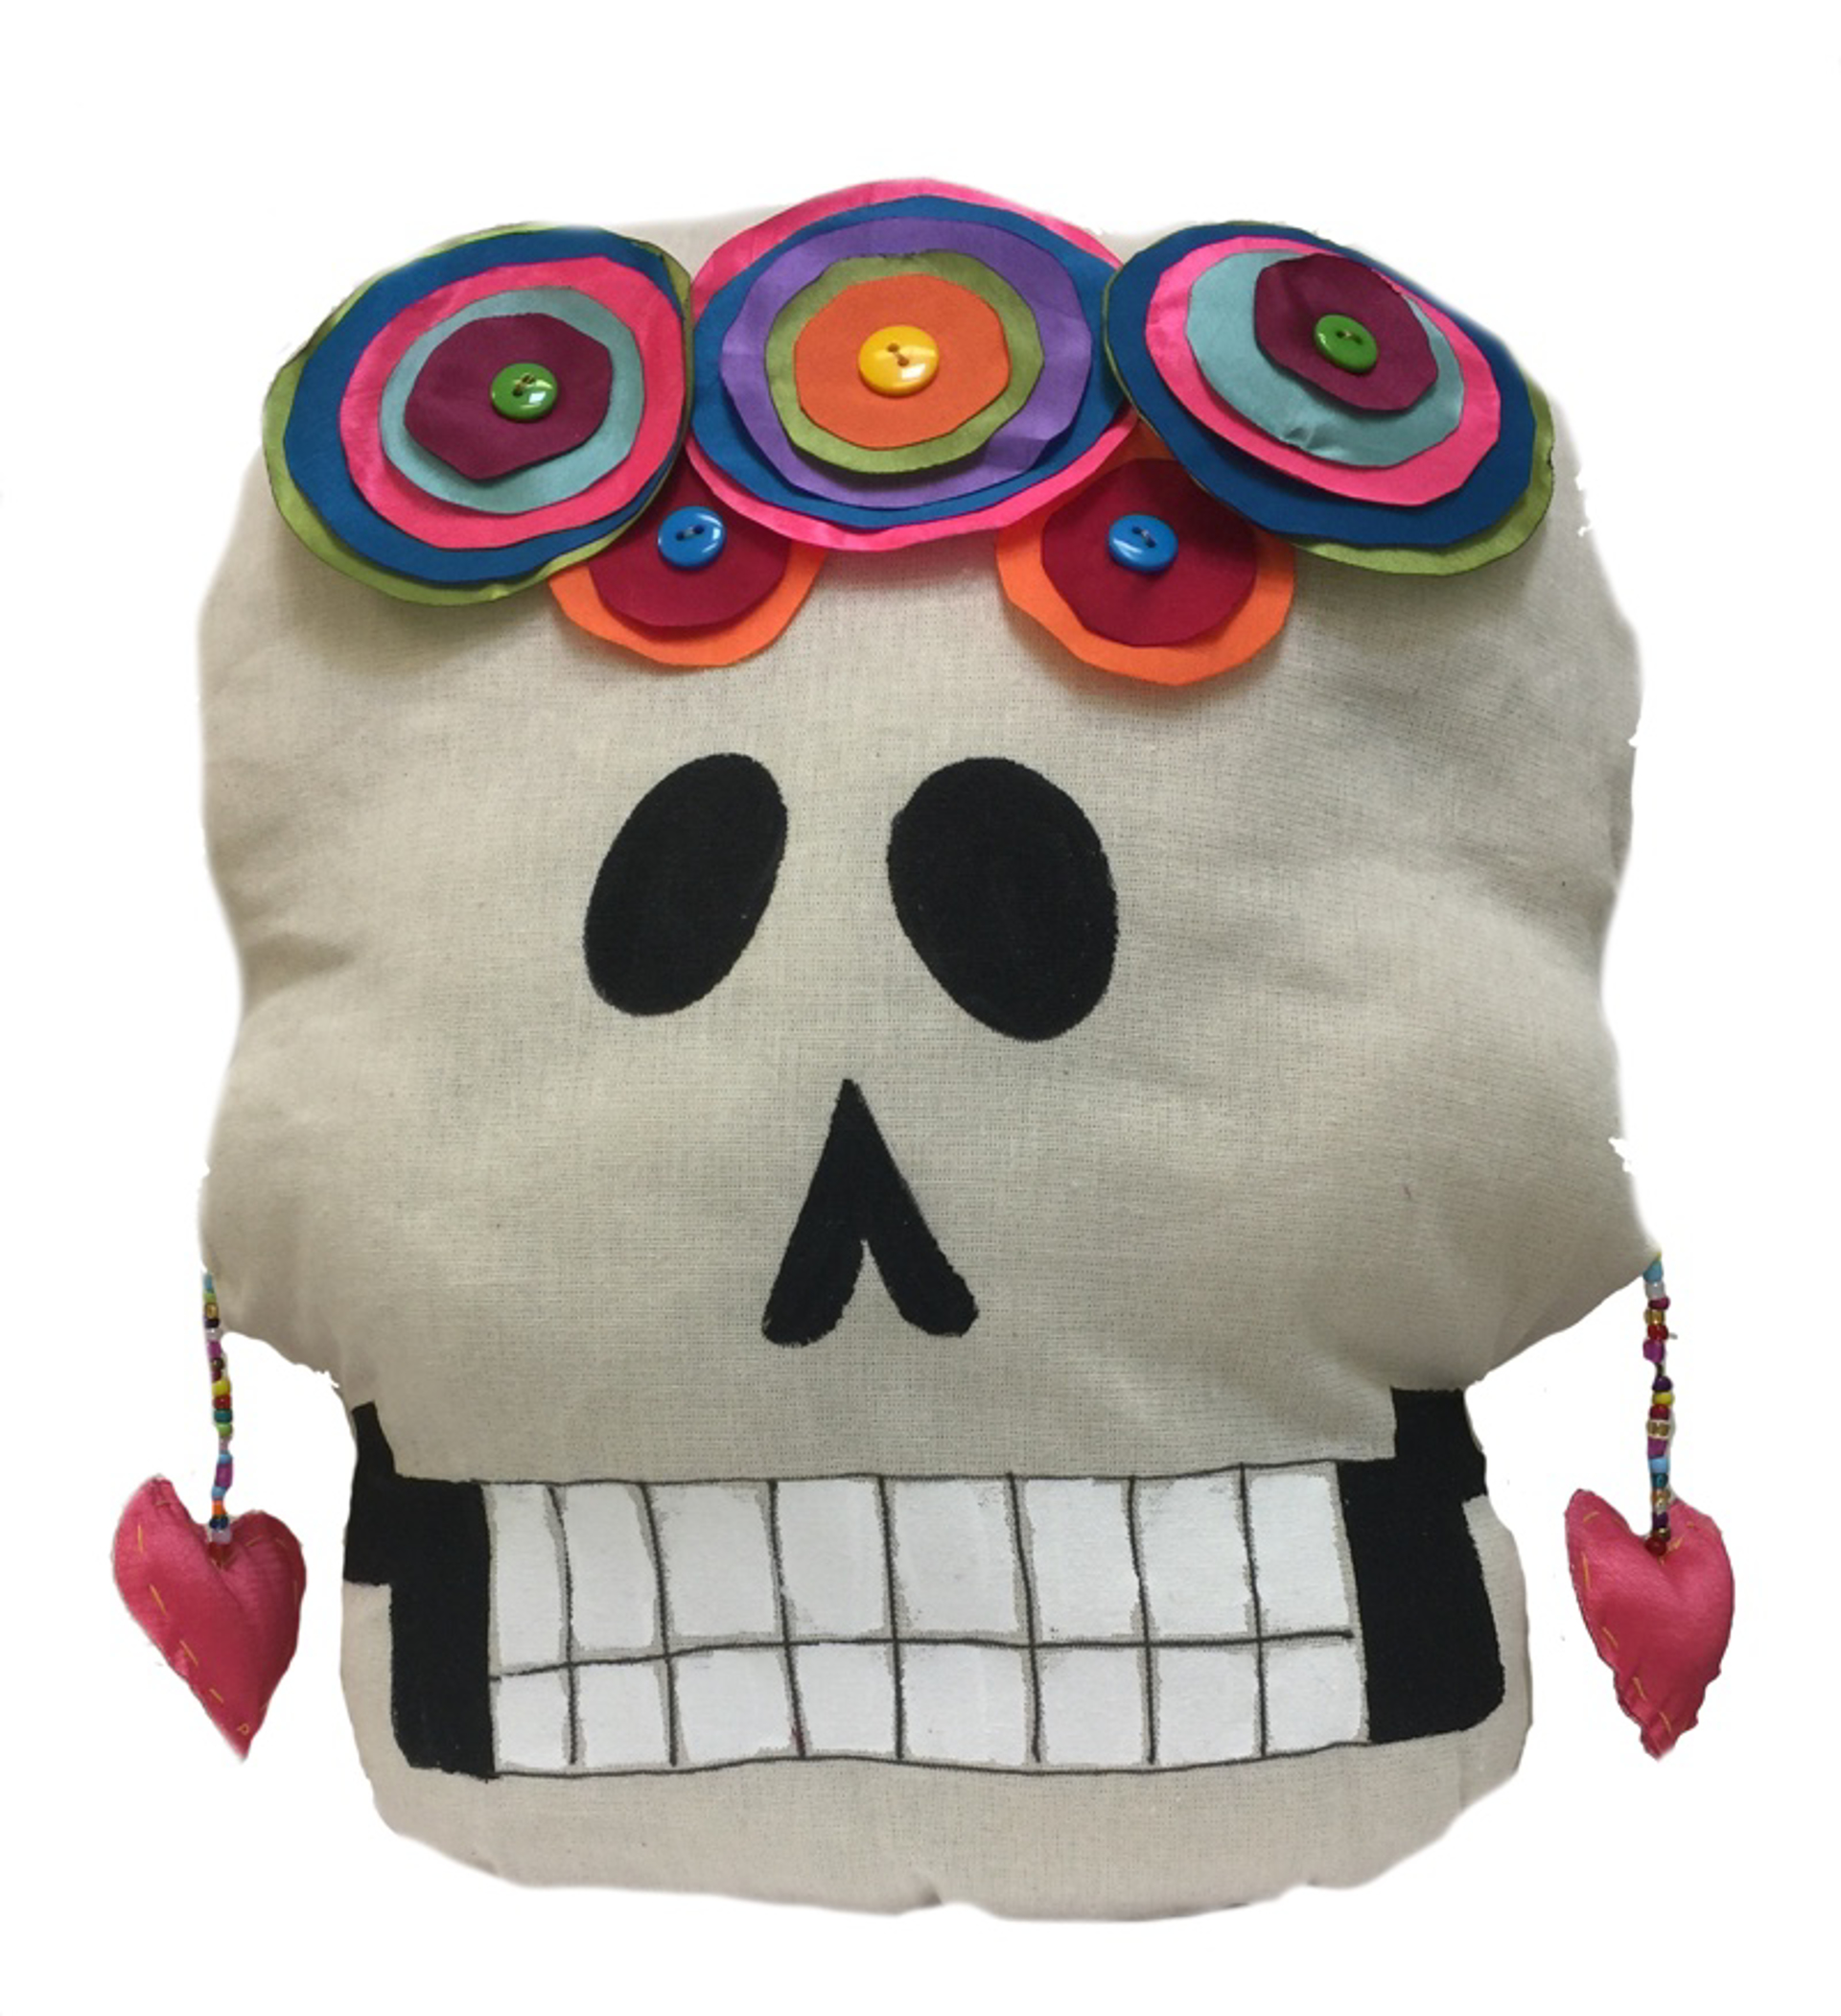 Pillow - Calavera Grande - Hand-painted canvas and sewn - Multi Color Applications by Indigo Desert Ranch - Day of the Dead